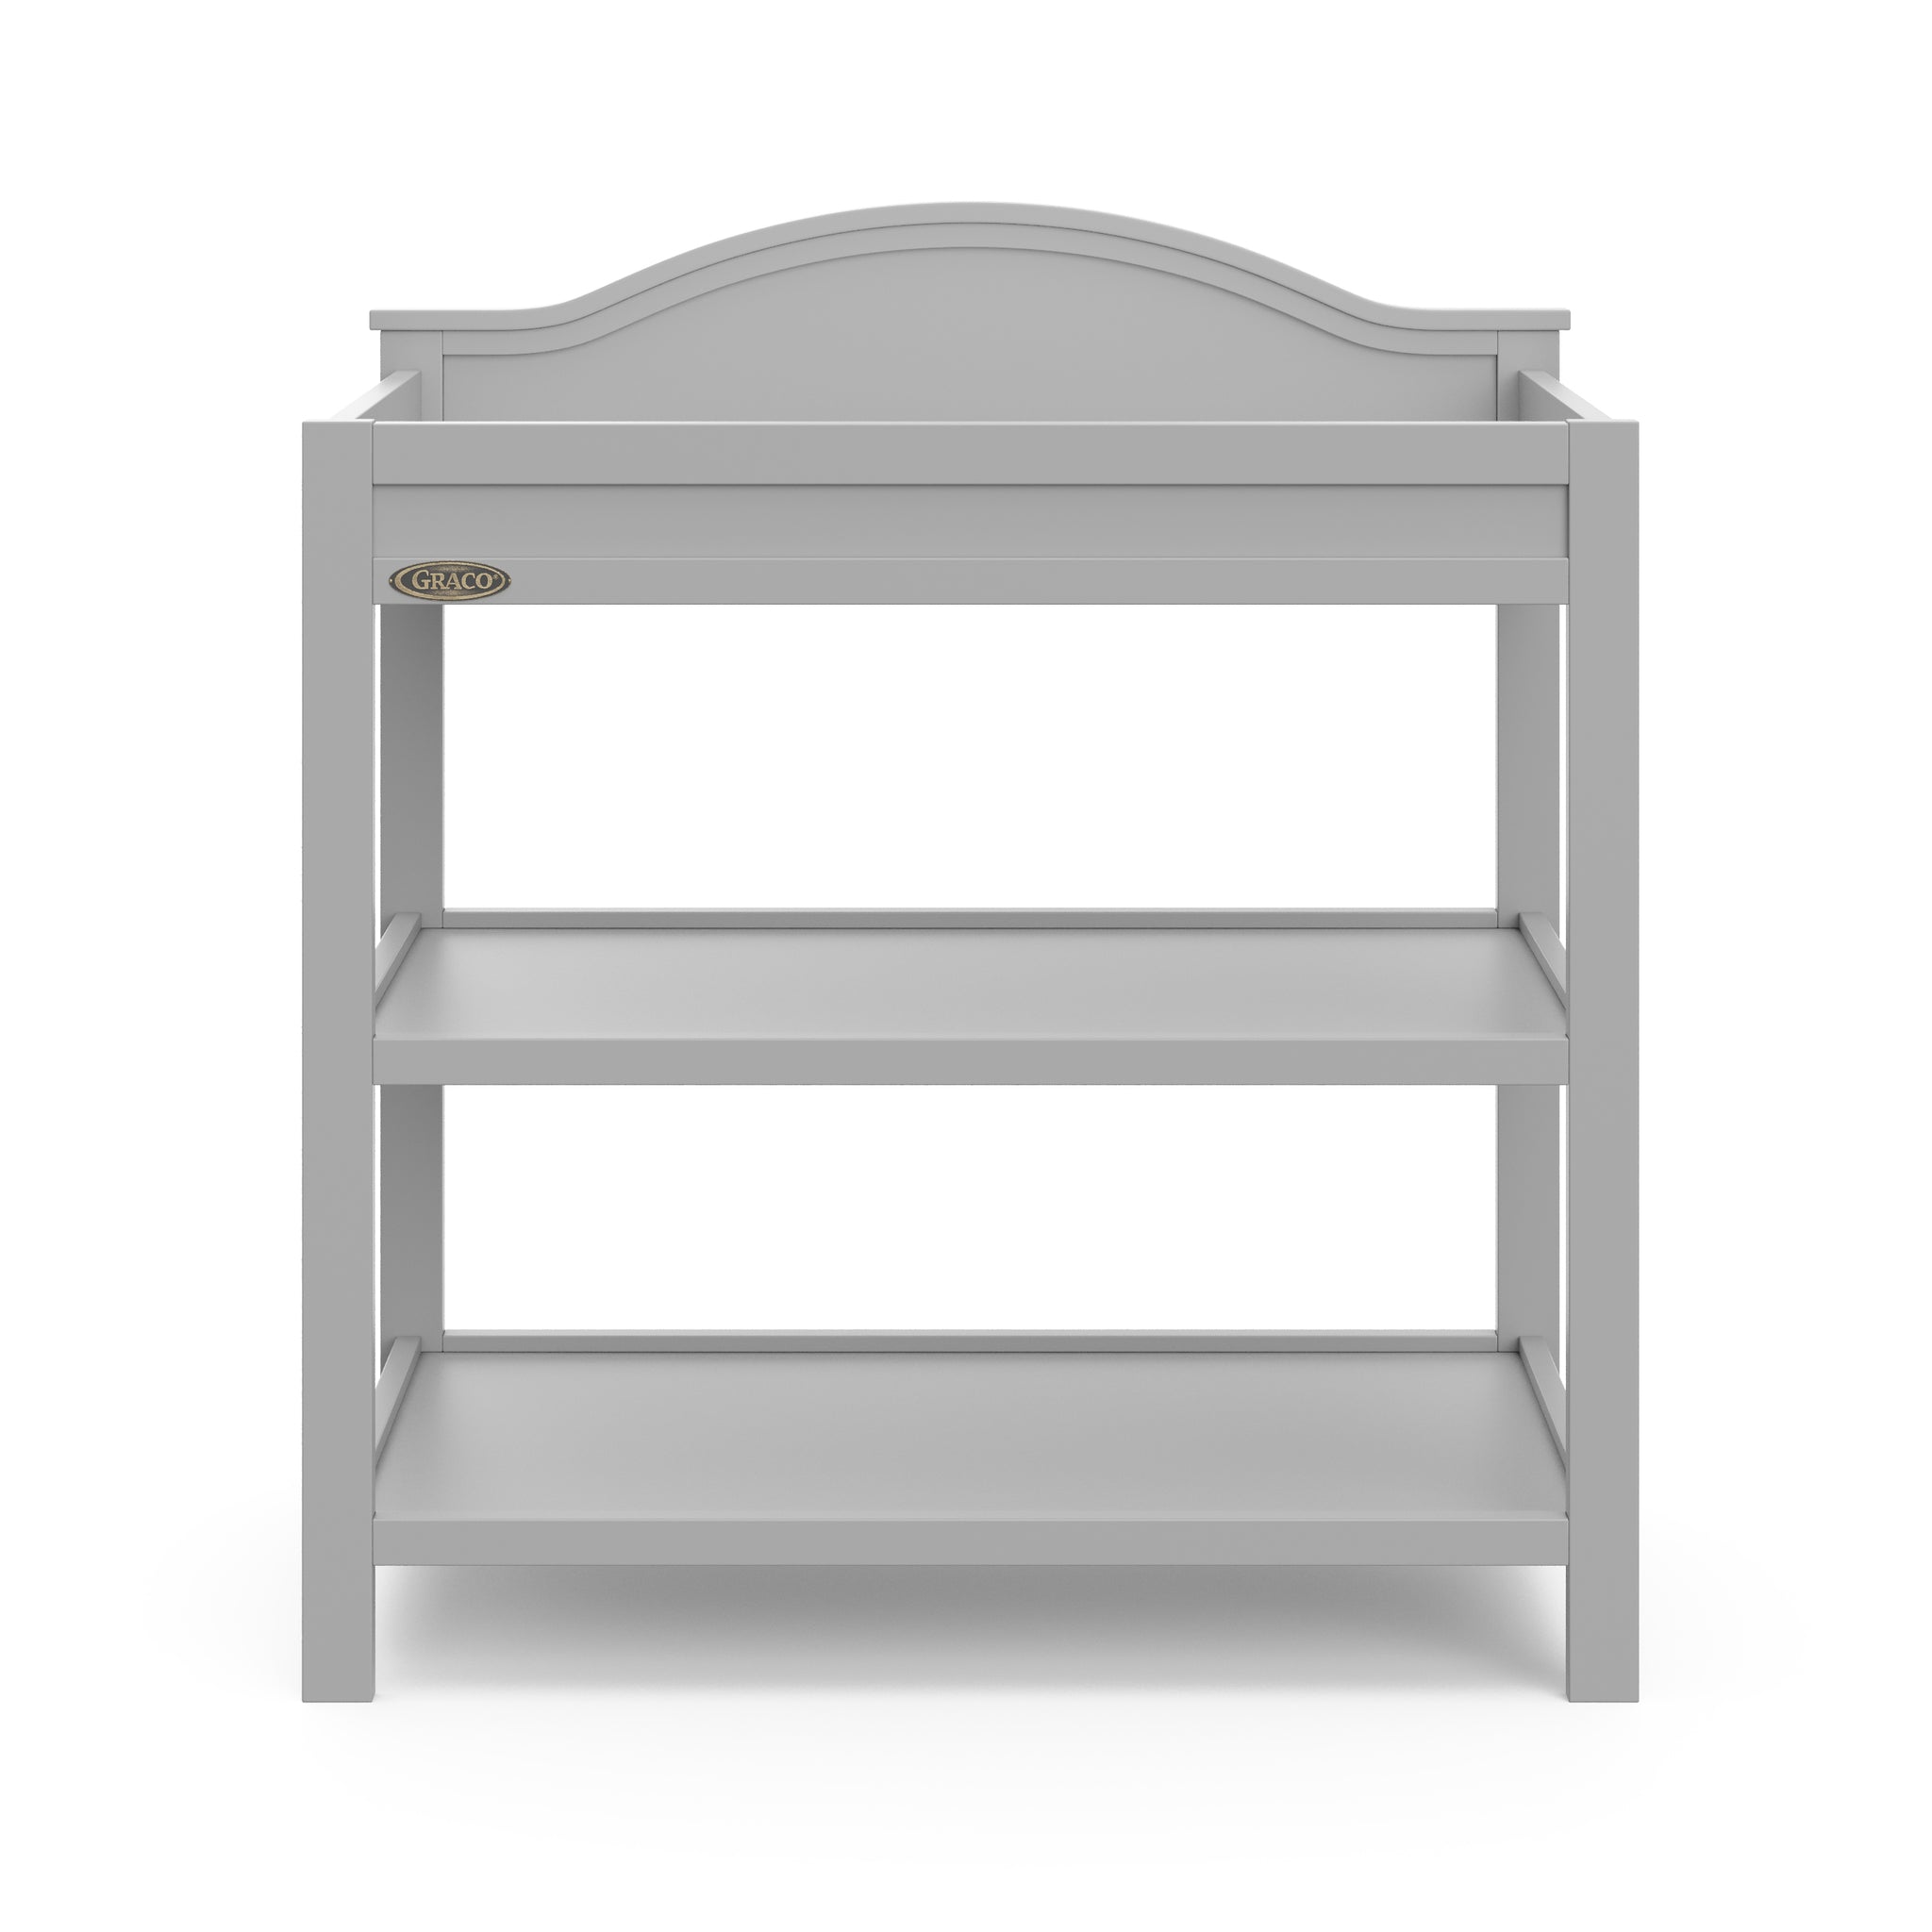 Front view of pebble gray changing table with two open shelves